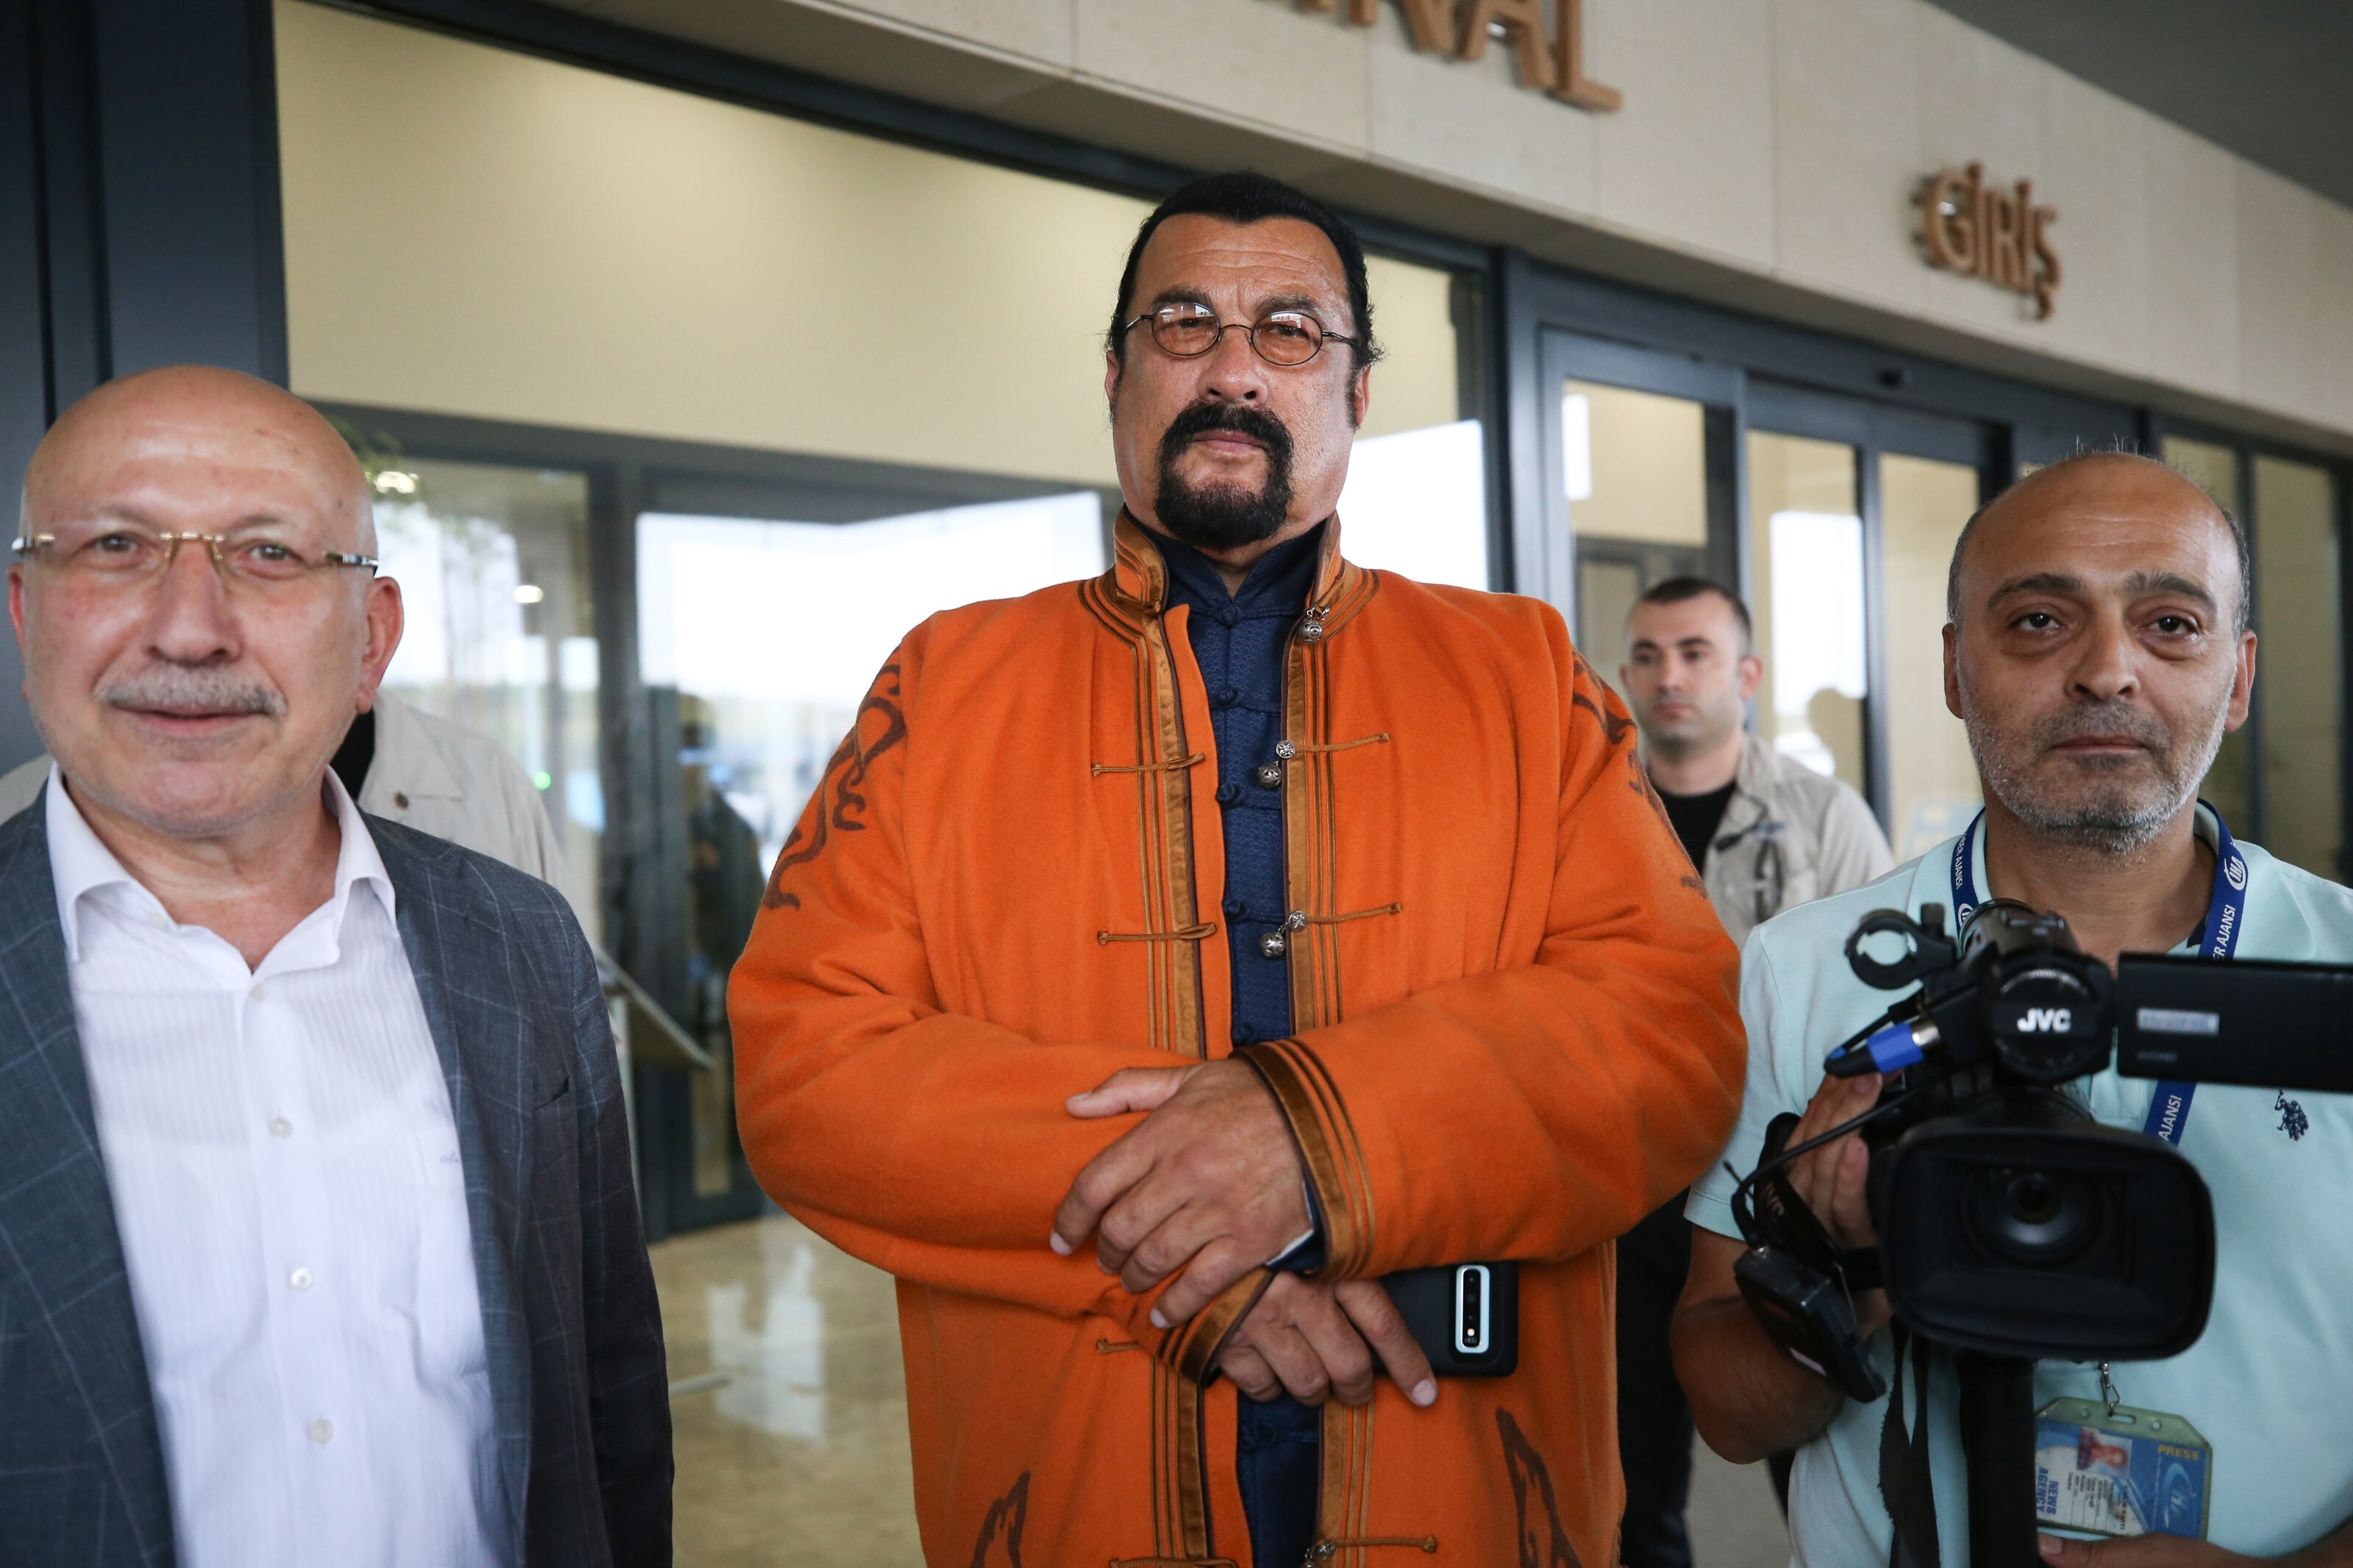 Steven Seagal: An American actor, screenwriter and martial artist, A 7th-dan black belt in aikido, Istanbul Airport, 2019. 3200x2140 HD Background.